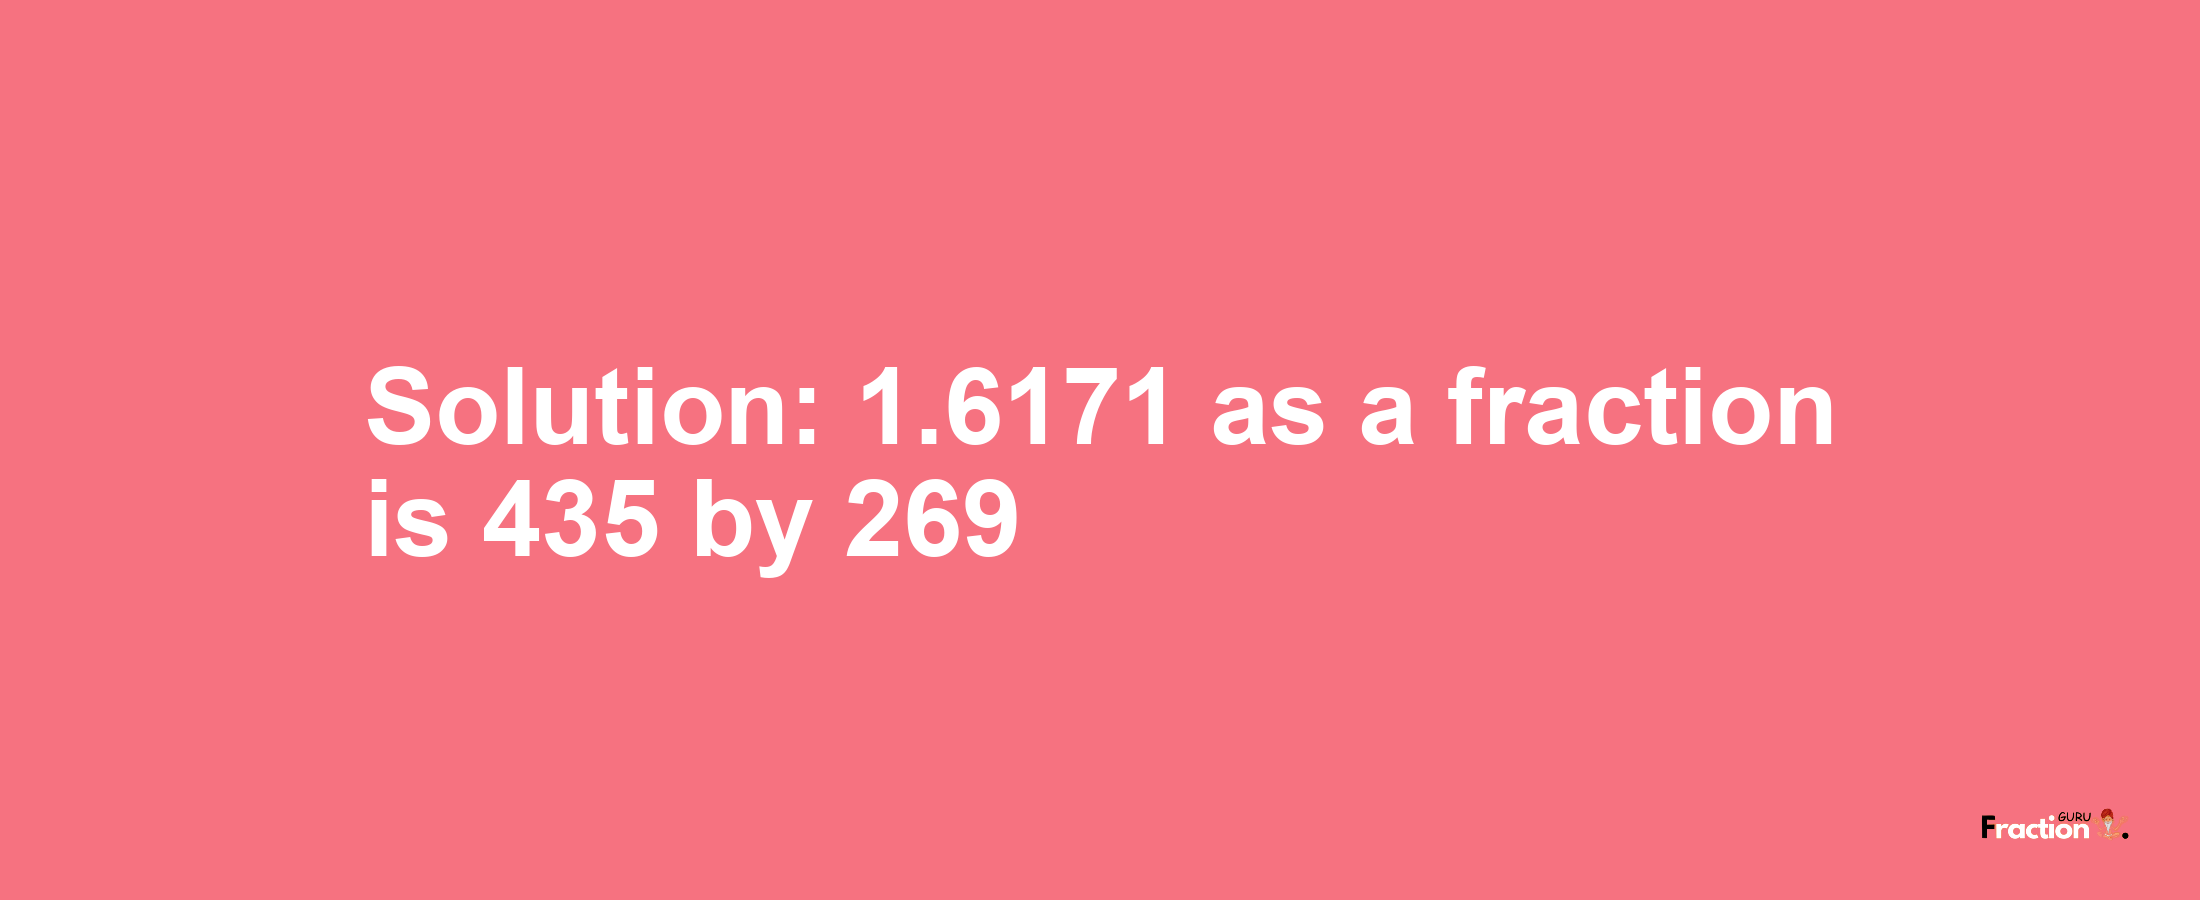 Solution:1.6171 as a fraction is 435/269